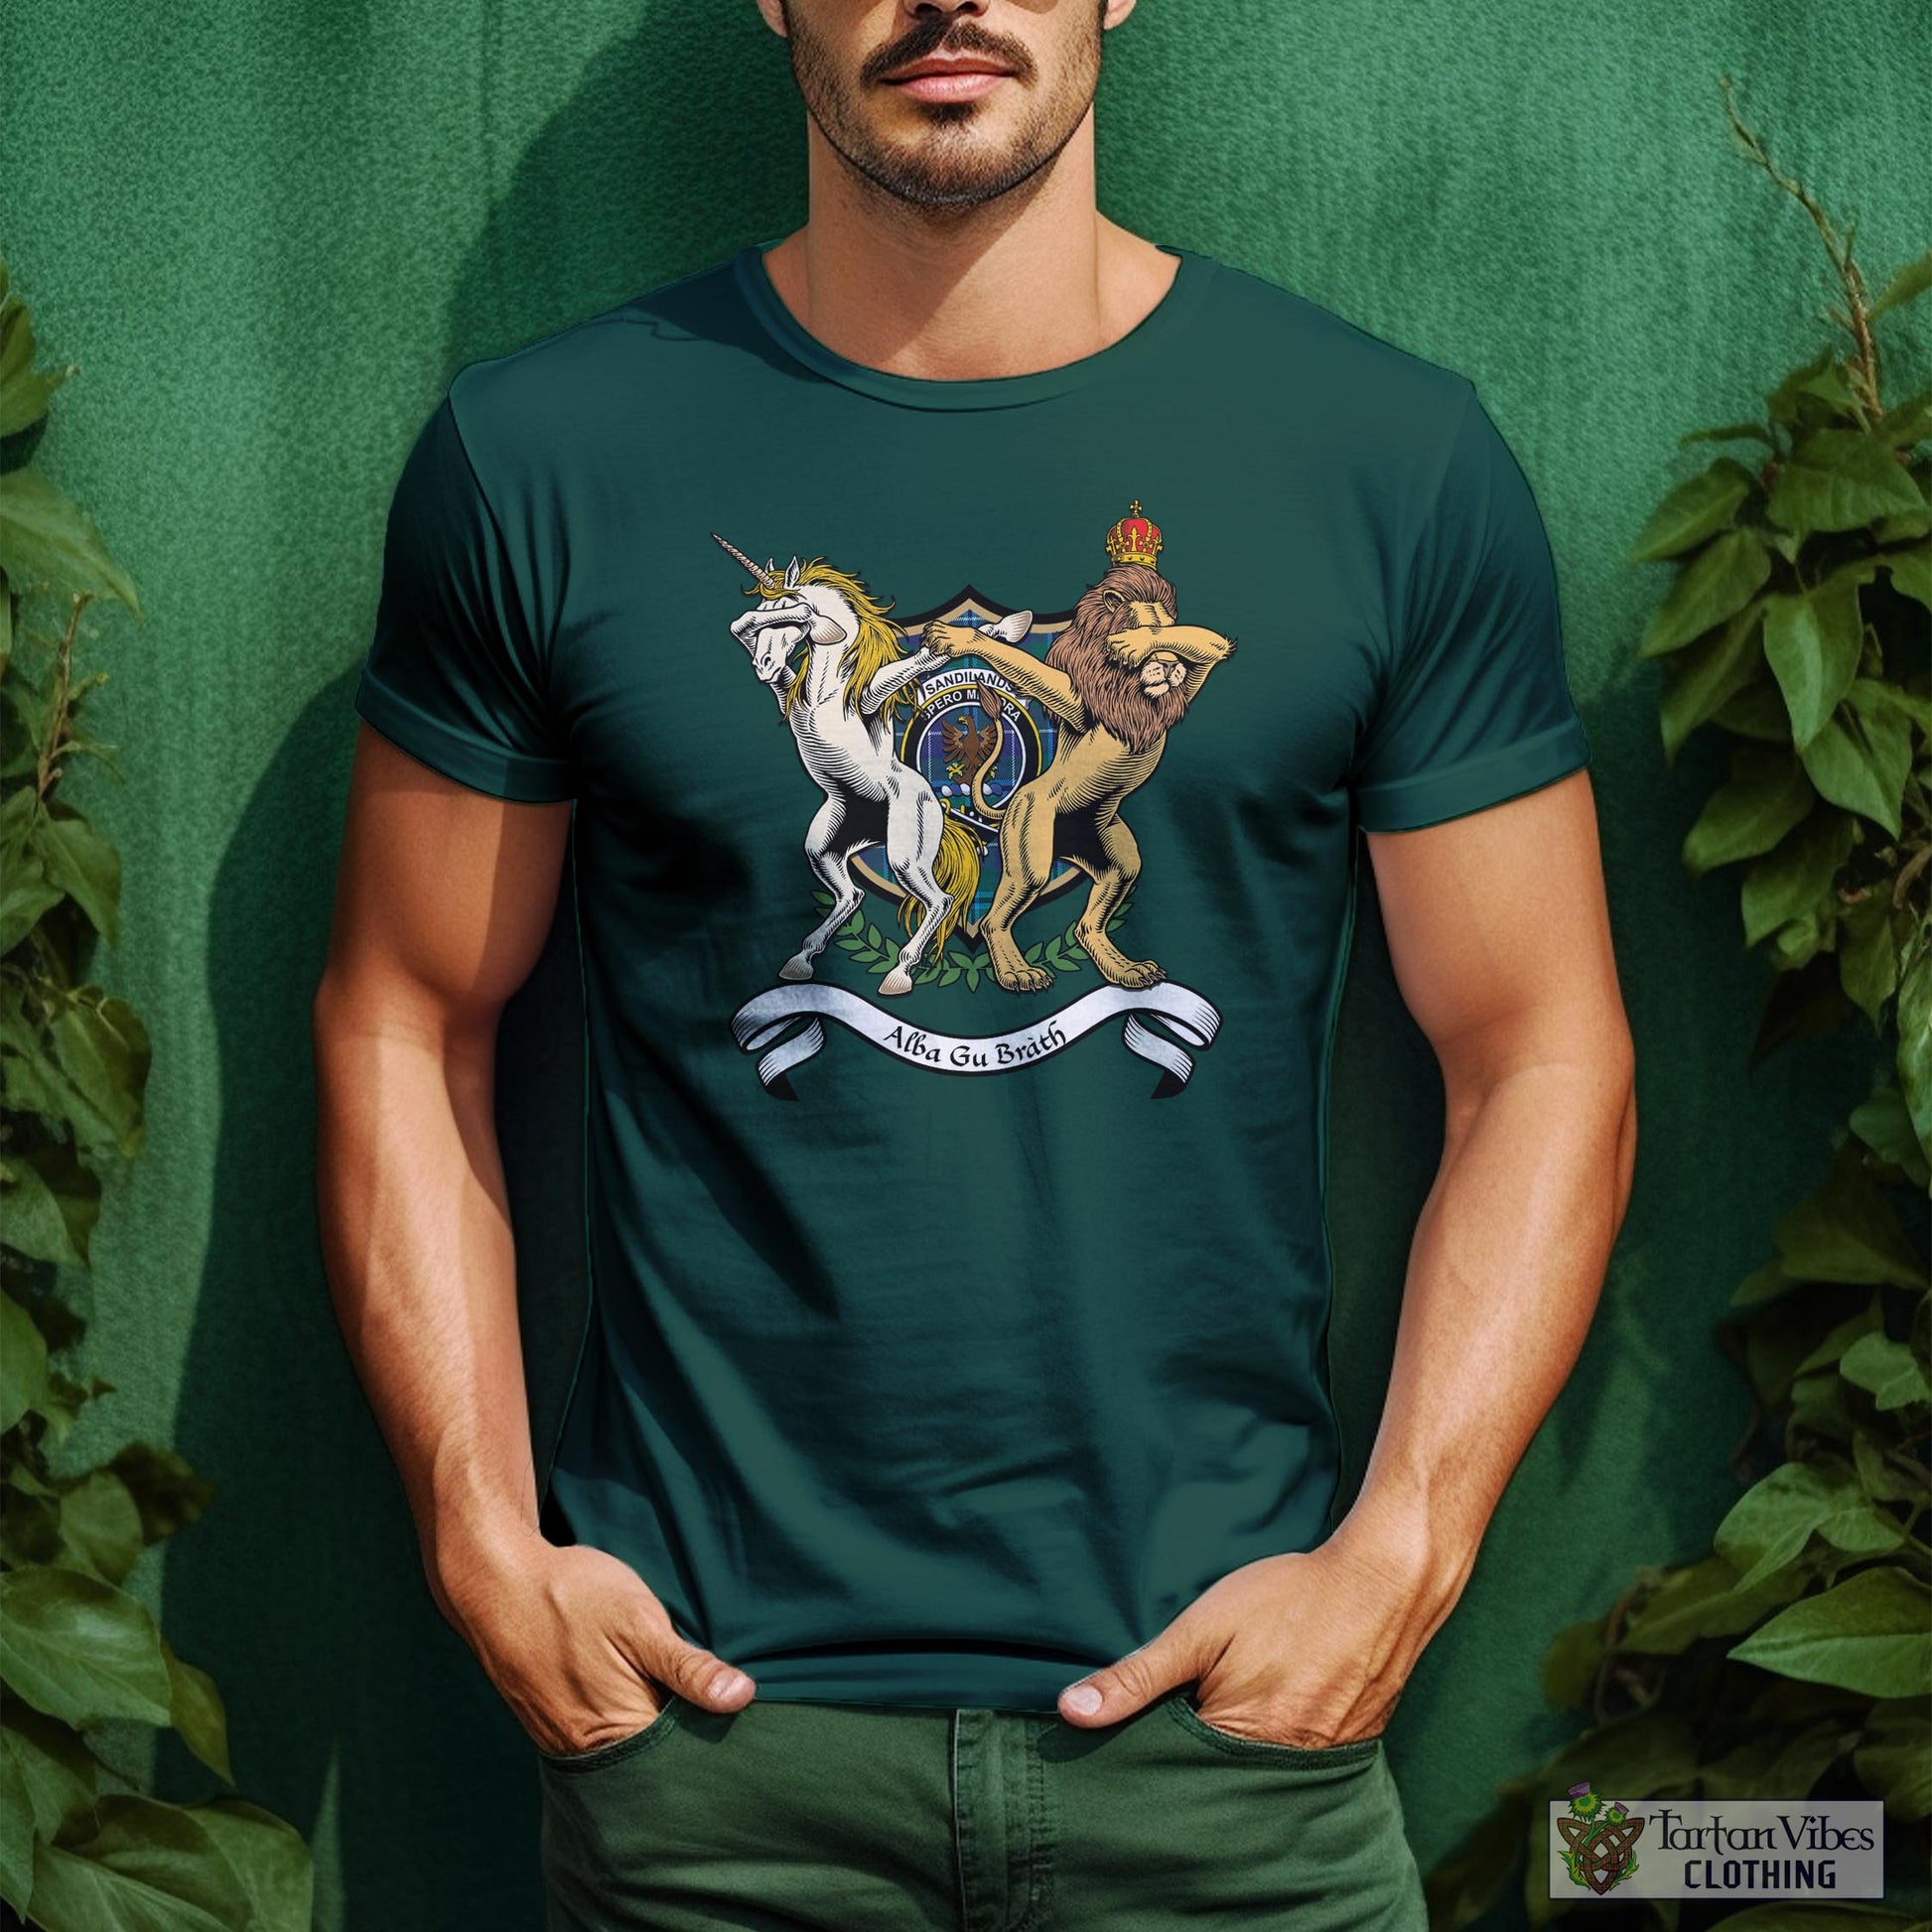 Tartan Vibes Clothing Sandilands Family Crest Cotton Men's T-Shirt with Scotland Royal Coat Of Arm Funny Style